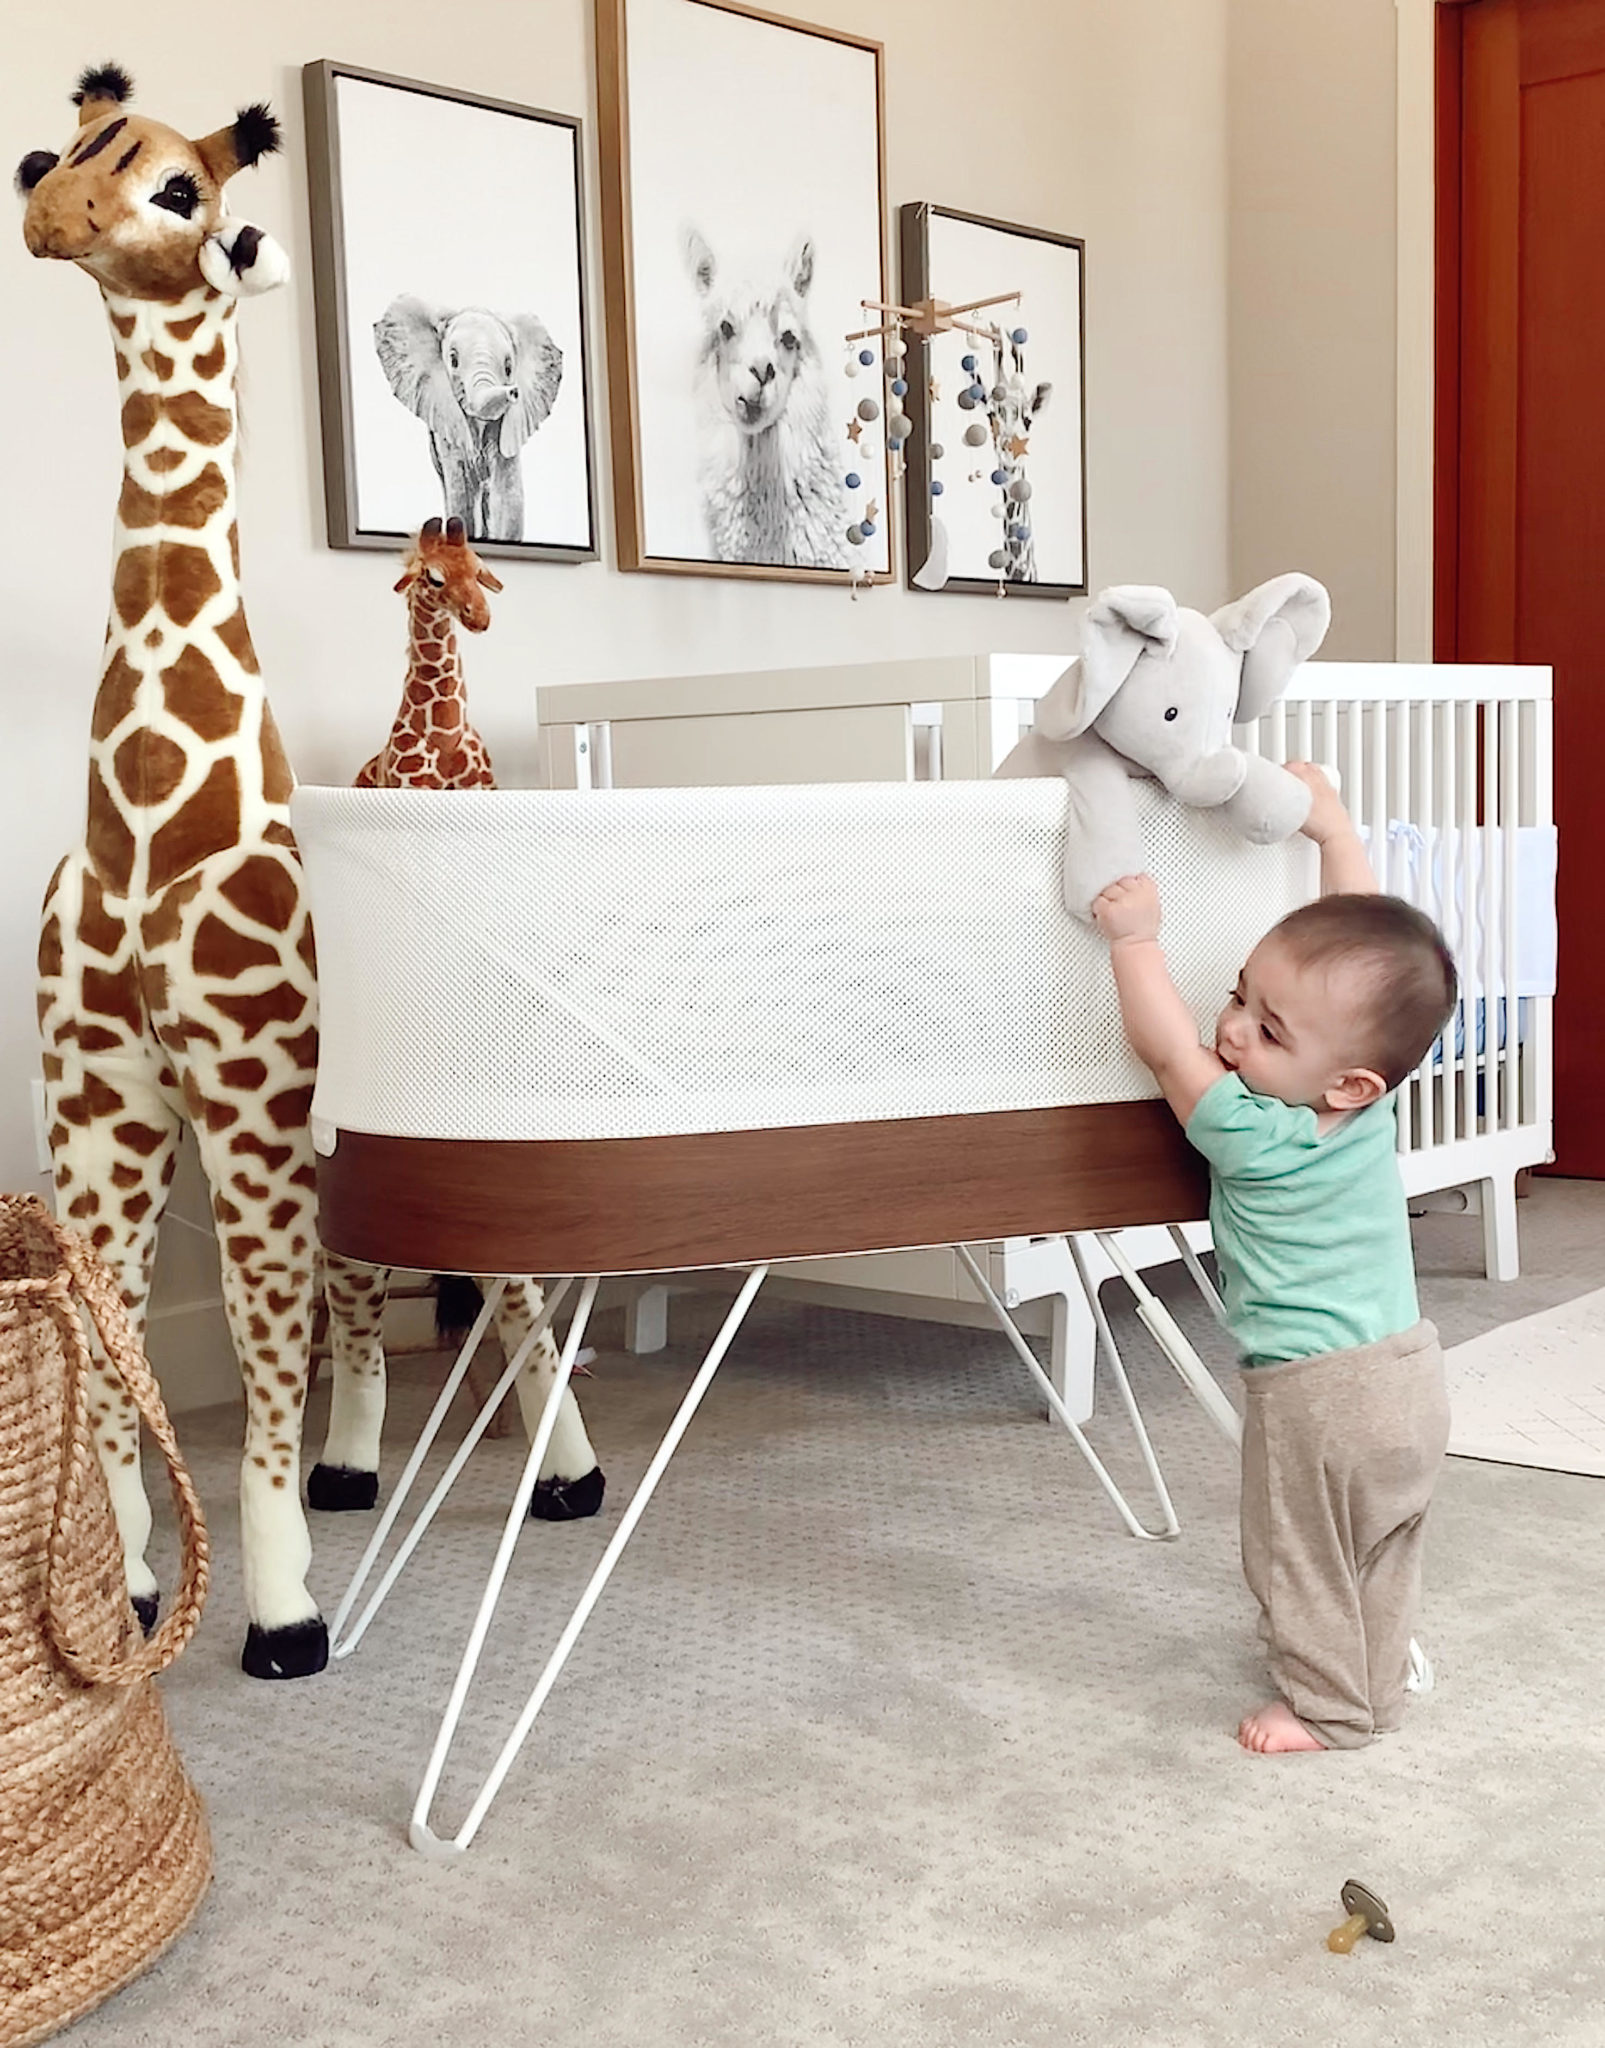 newborn baby products I actually used | Newborn Baby Items by popular San Francisco motherhood blog, Just Add Glam: image of a baby boy standing next to a bassinet and a life size stuffed giraffe.